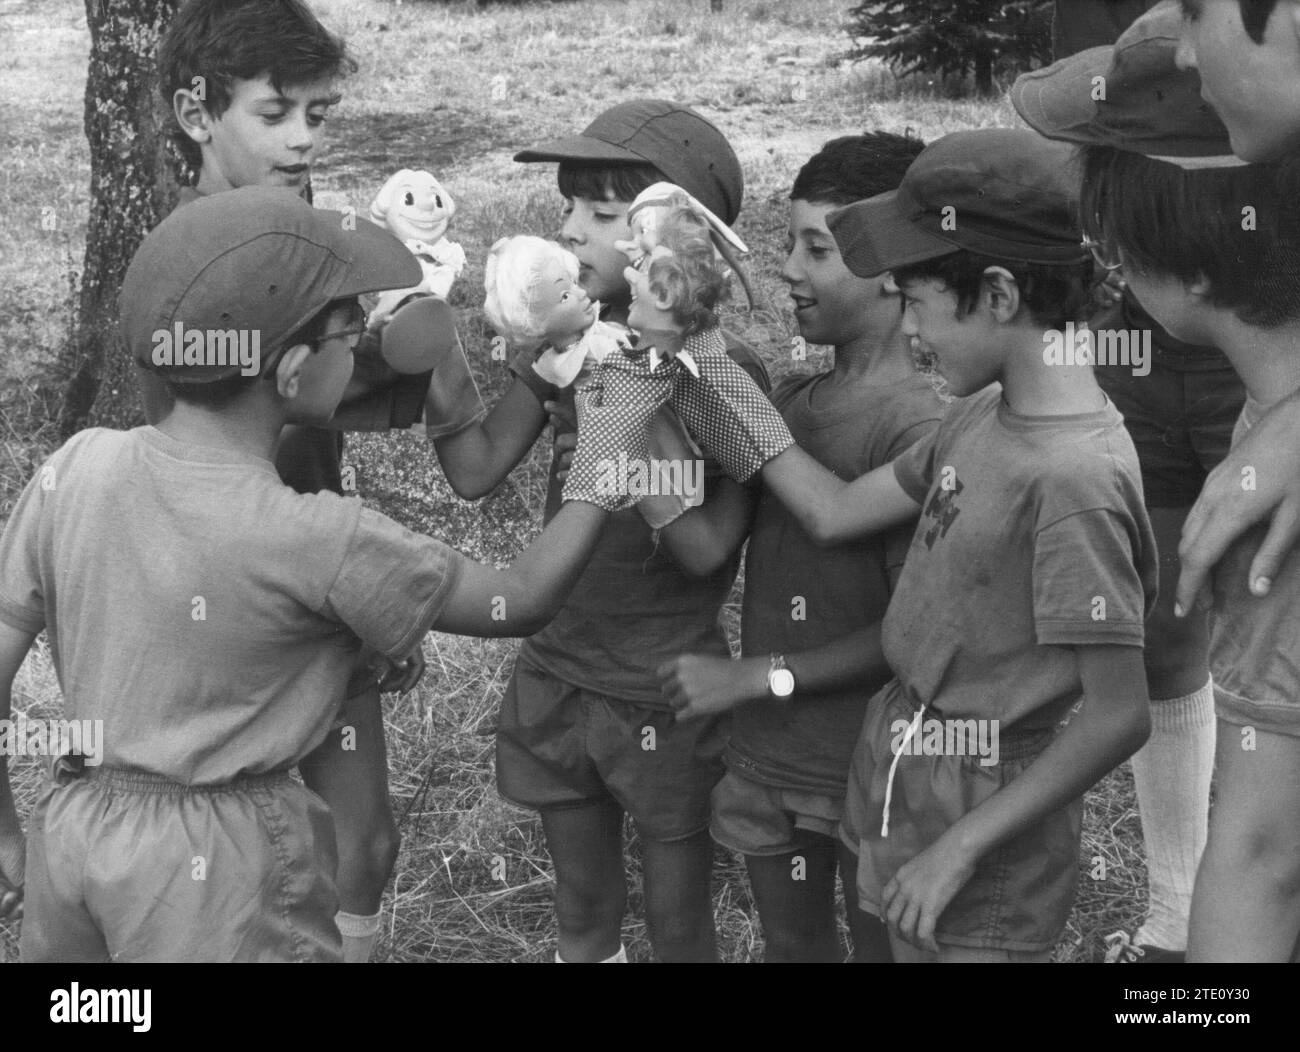 01/01/1970. Children from La Oje Playing with Puppets at a Camp. Credit: Album / Archivo ABC / D. Cubillo Stock Photo